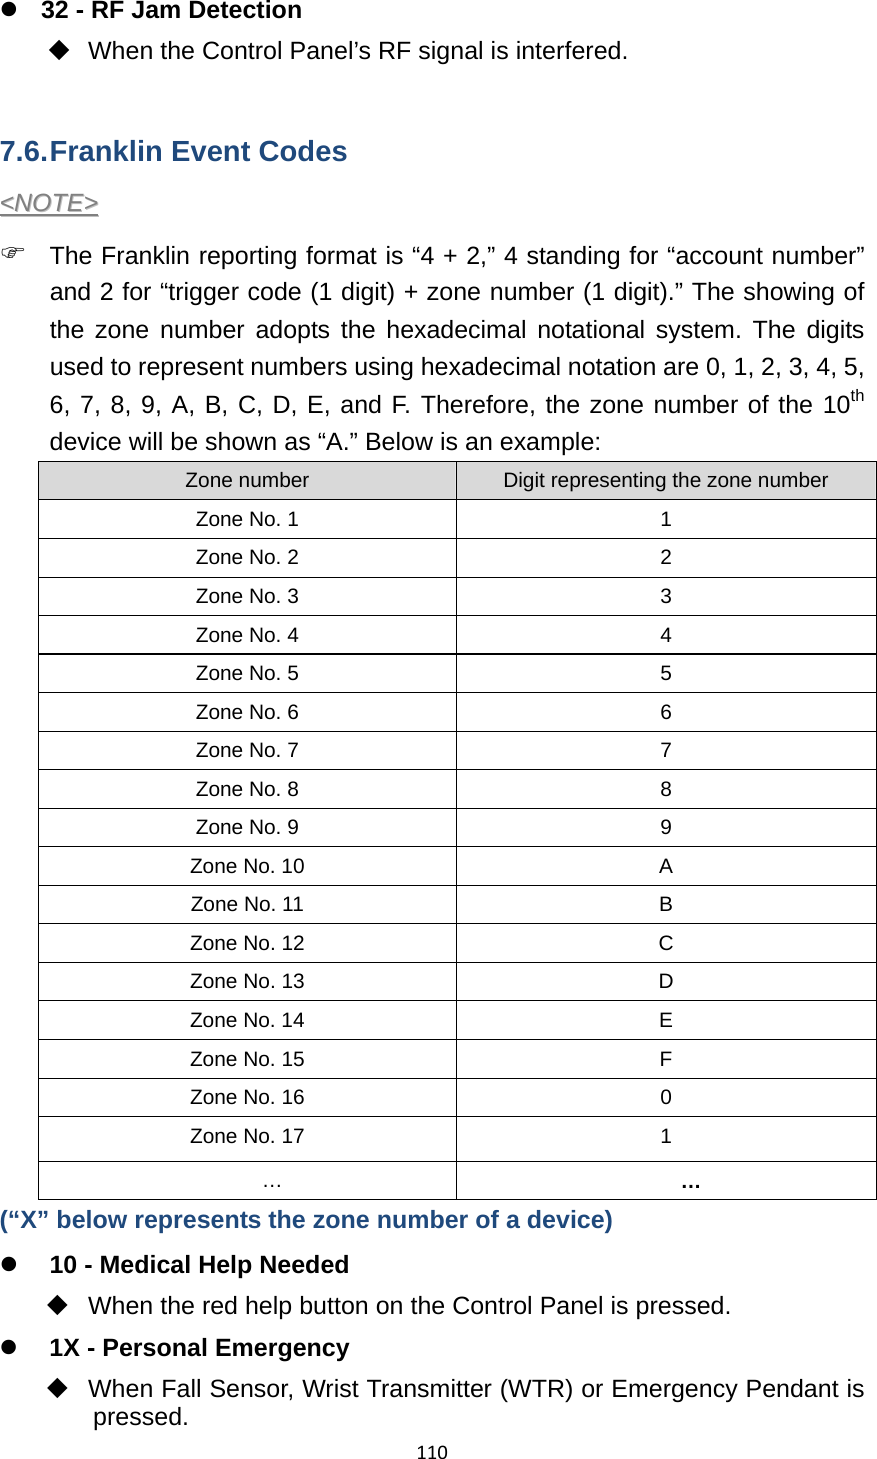 110z 32 - RF Jam Detection   When the Control Panel’s RF signal is interfered.  7.6. Franklin Event Codes &lt;&lt;NNOOTTEE&gt;&gt;  ) The Franklin reporting format is “4 + 2,” 4 standing for “account number” and 2 for “trigger code (1 digit) + zone number (1 digit).” The showing of the zone number adopts the hexadecimal notational system. The digits used to represent numbers using hexadecimal notation are 0, 1, 2, 3, 4, 5, 6, 7, 8, 9, A, B, C, D, E, and F. Therefore, the zone number of the 10th device will be shown as “A.” Below is an example: Zone number  Digit representing the zone number Zone No. 1  1 Zone No. 2  2 Zone No. 3  3 Zone No. 4  4 Zone No. 5  5 Zone No. 6  6 Zone No. 7  7 Zone No. 8  8 Zone No. 9  9 Zone No. 10  A Zone No. 11  B Zone No. 12  C Zone No. 13  D Zone No. 14  E Zone No. 15  F Zone No. 16  0 Zone No. 17  1 …  … (“X” below represents the zone number of a device)   z 10 - Medical Help Needed   When the red help button on the Control Panel is pressed. z 1X - Personal Emergency     When Fall Sensor, Wrist Transmitter (WTR) or Emergency Pendant is pressed. 